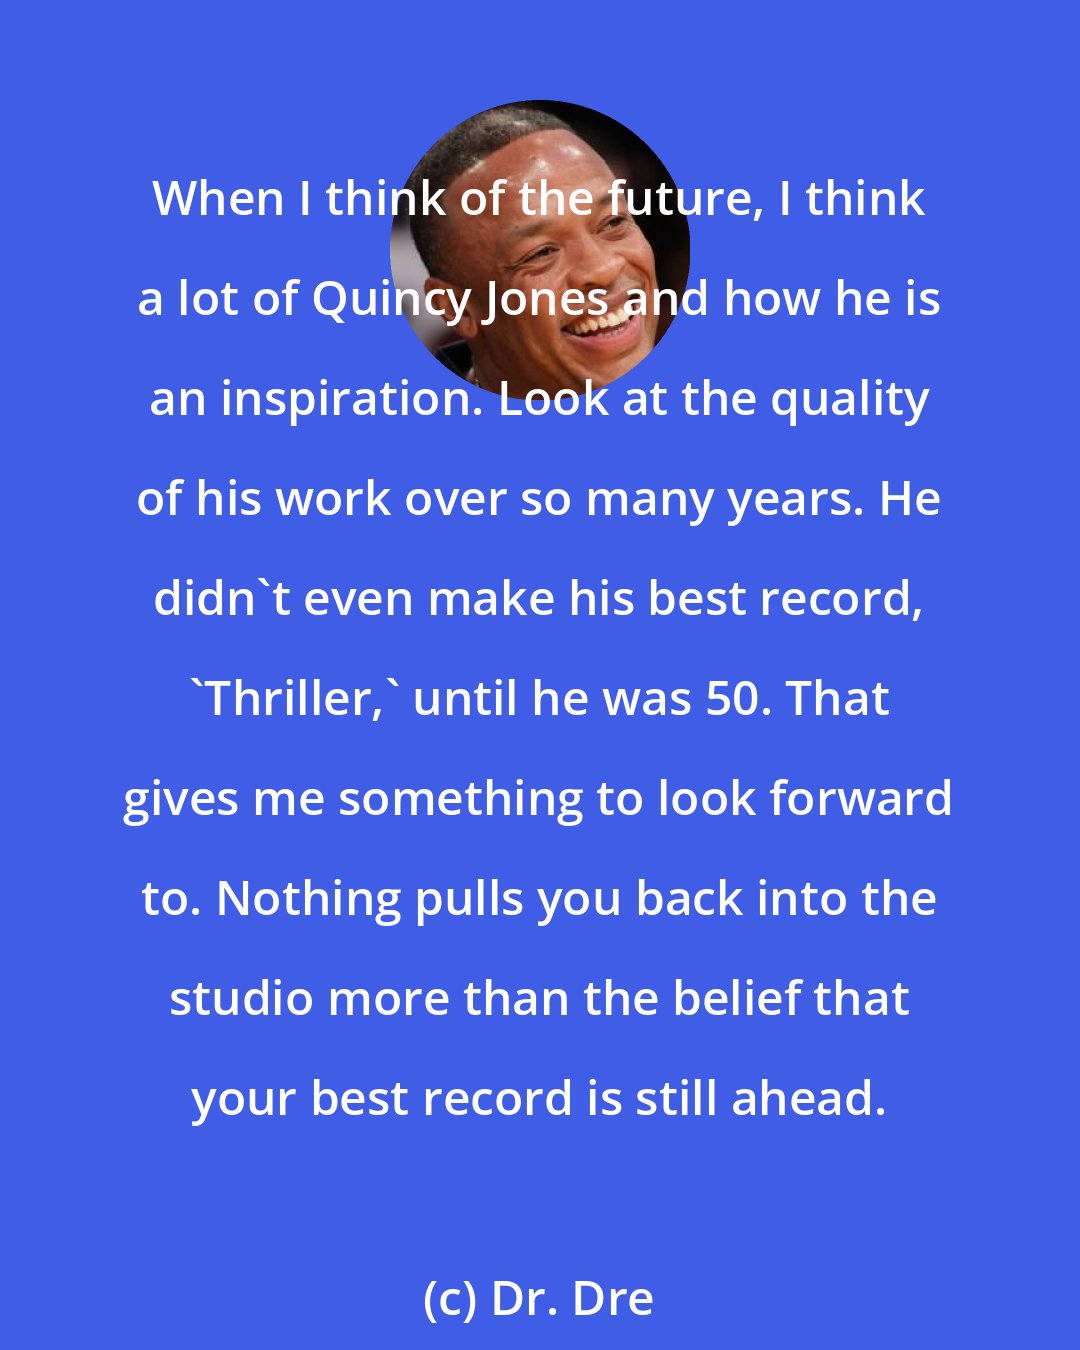 Dr. Dre: When I think of the future, I think a lot of Quincy Jones and how he is an inspiration. Look at the quality of his work over so many years. He didn't even make his best record, 'Thriller,' until he was 50. That gives me something to look forward to. Nothing pulls you back into the studio more than the belief that your best record is still ahead.